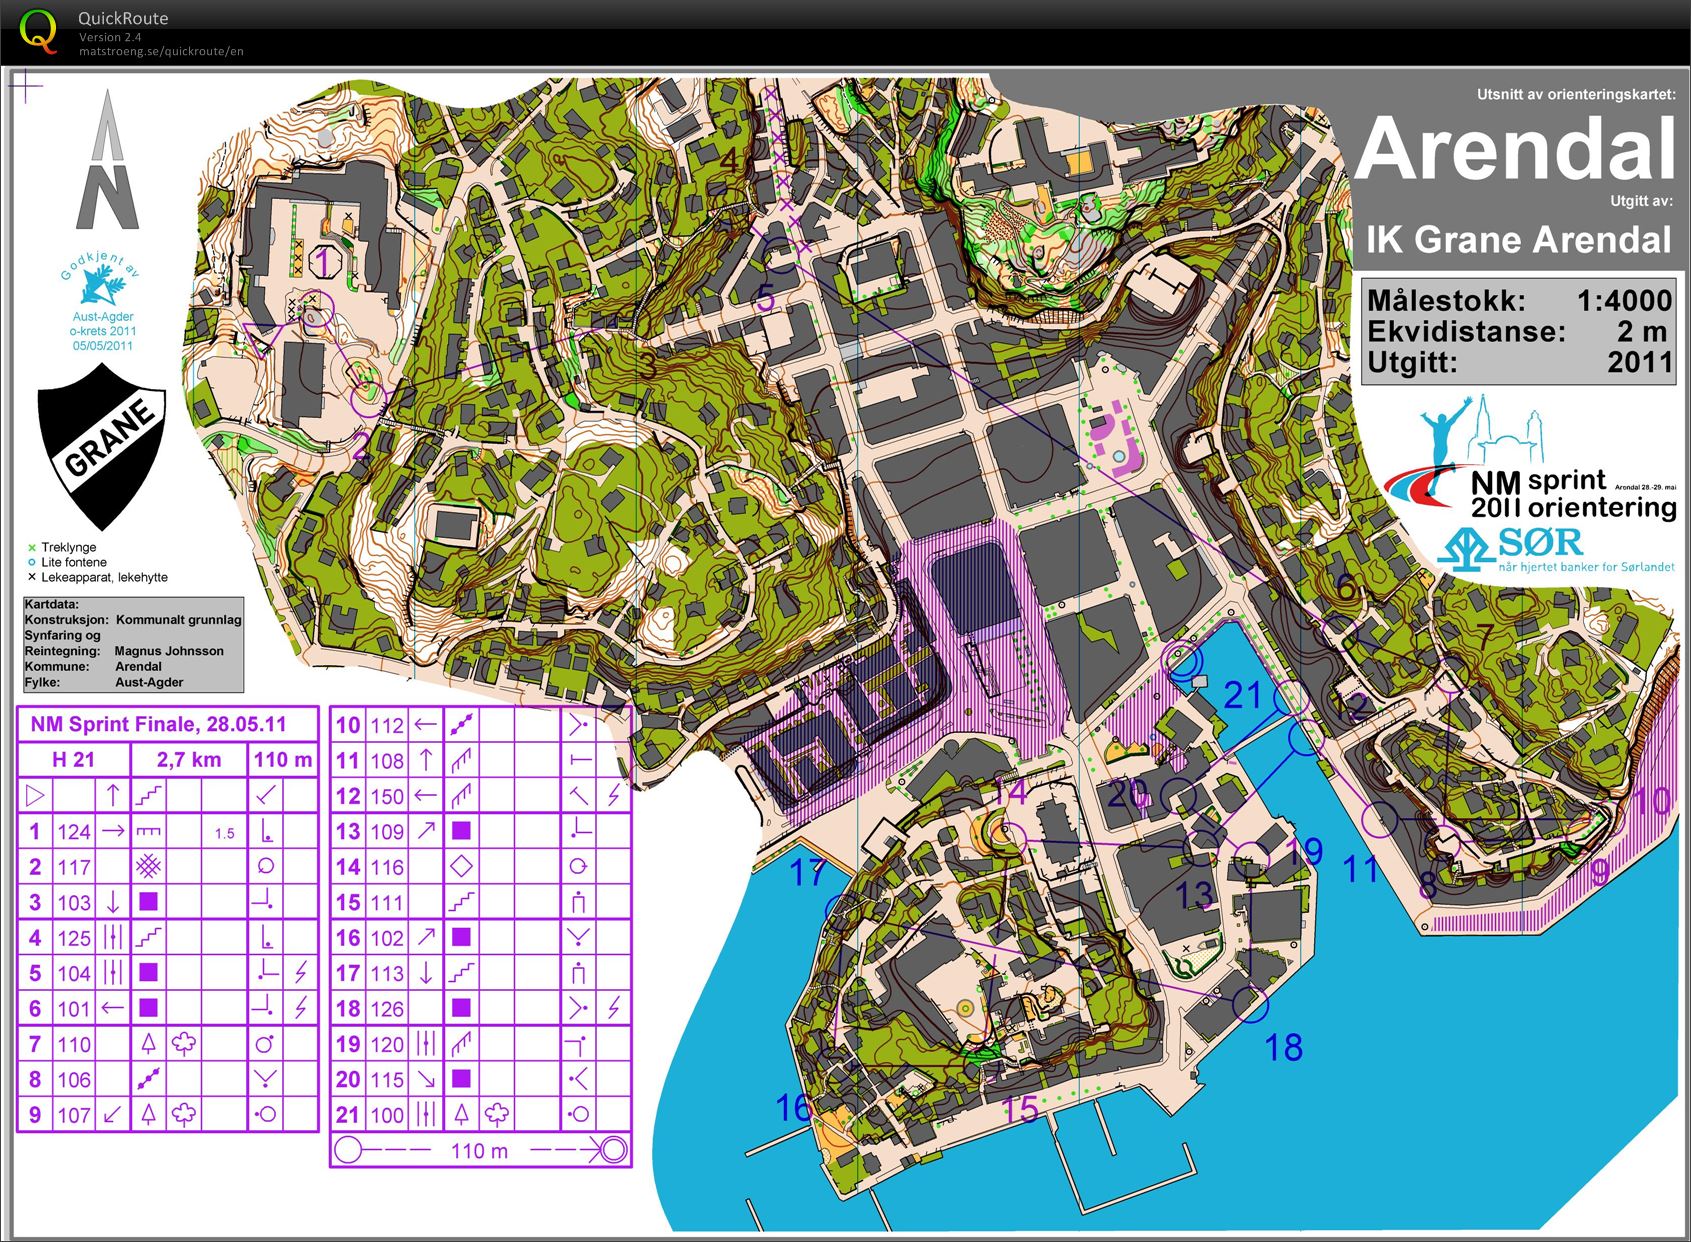 NM Sprint Arendal H21 course (09-07-2013)